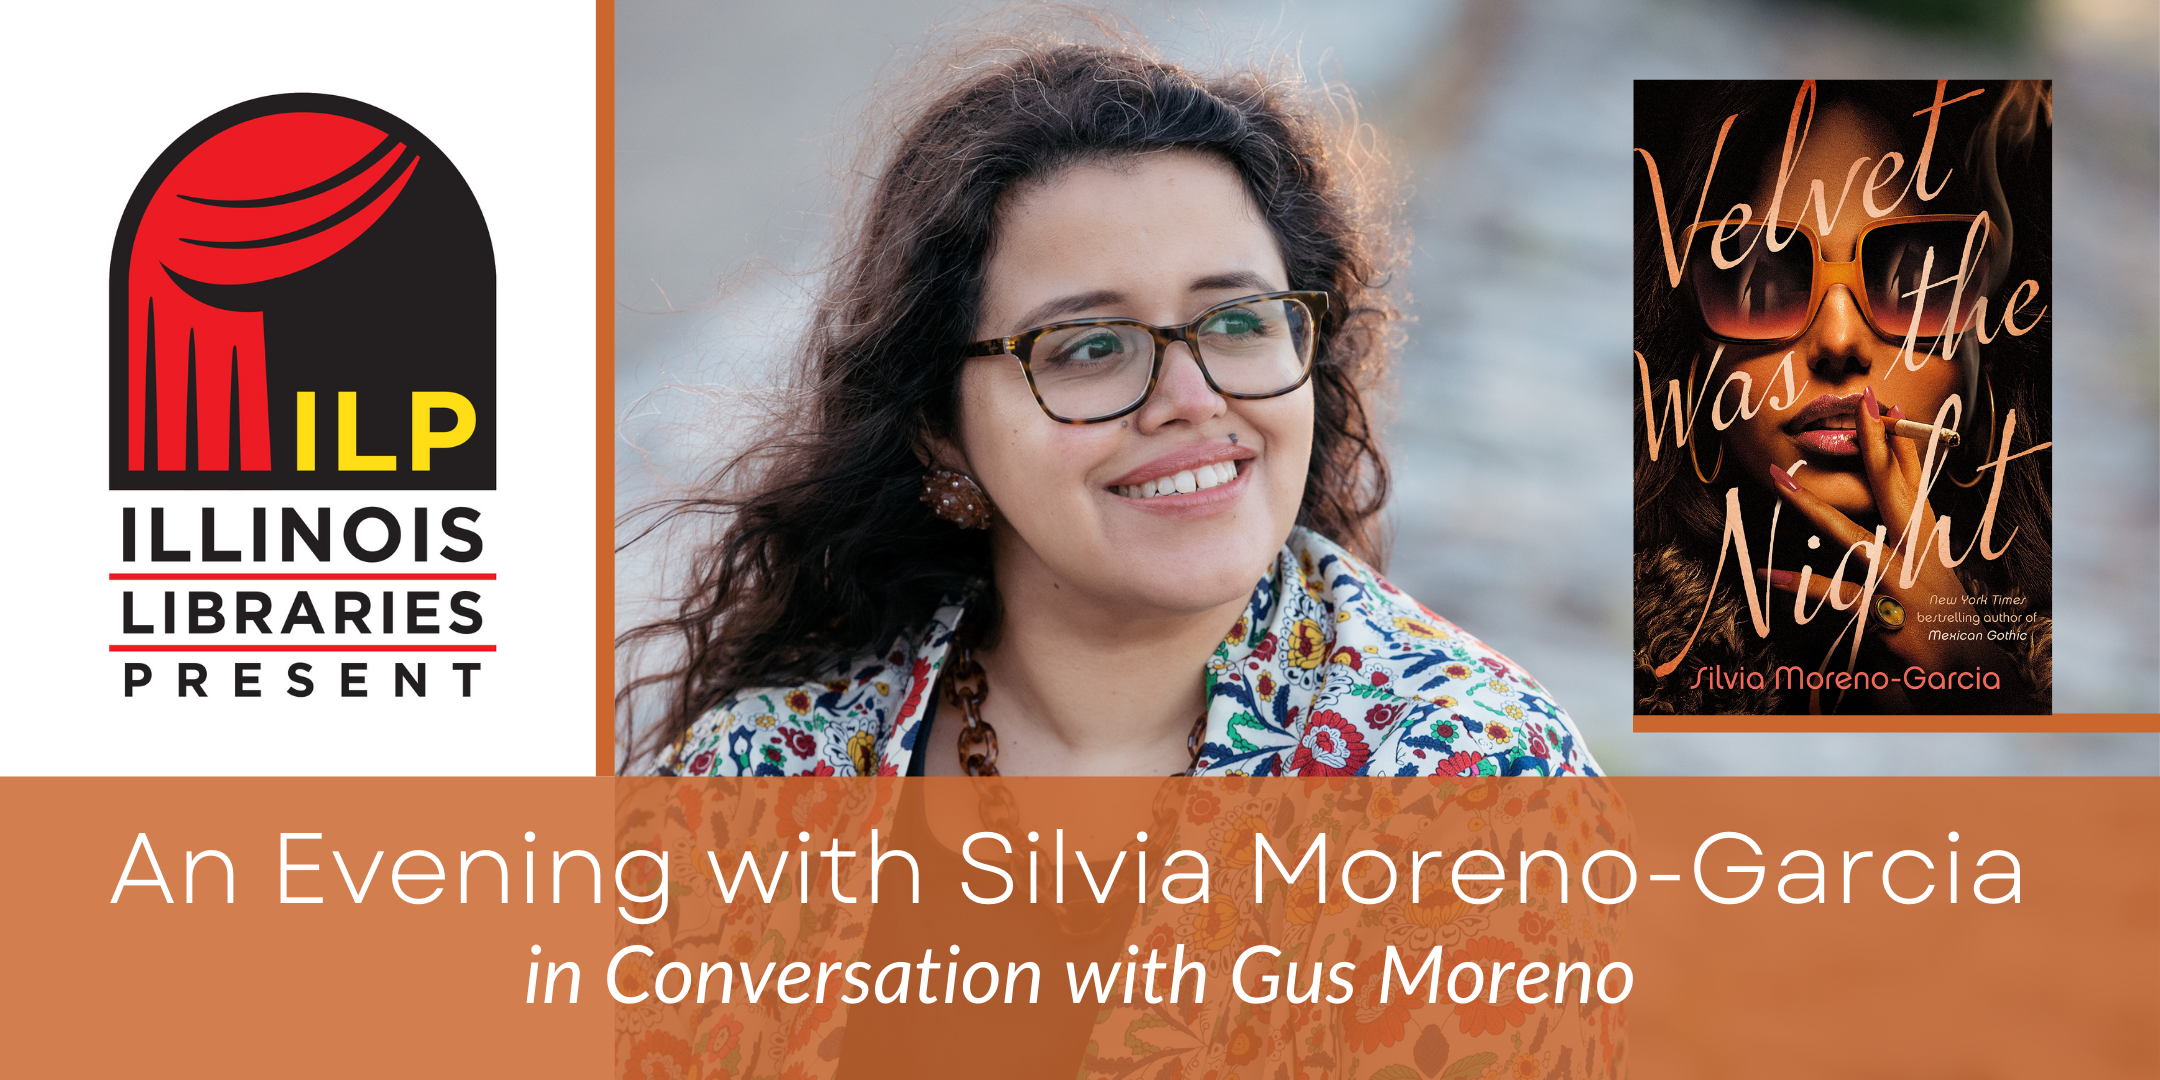 image of "Illinois Libraries Present: An Evening with Silvia Moreno-Garcia